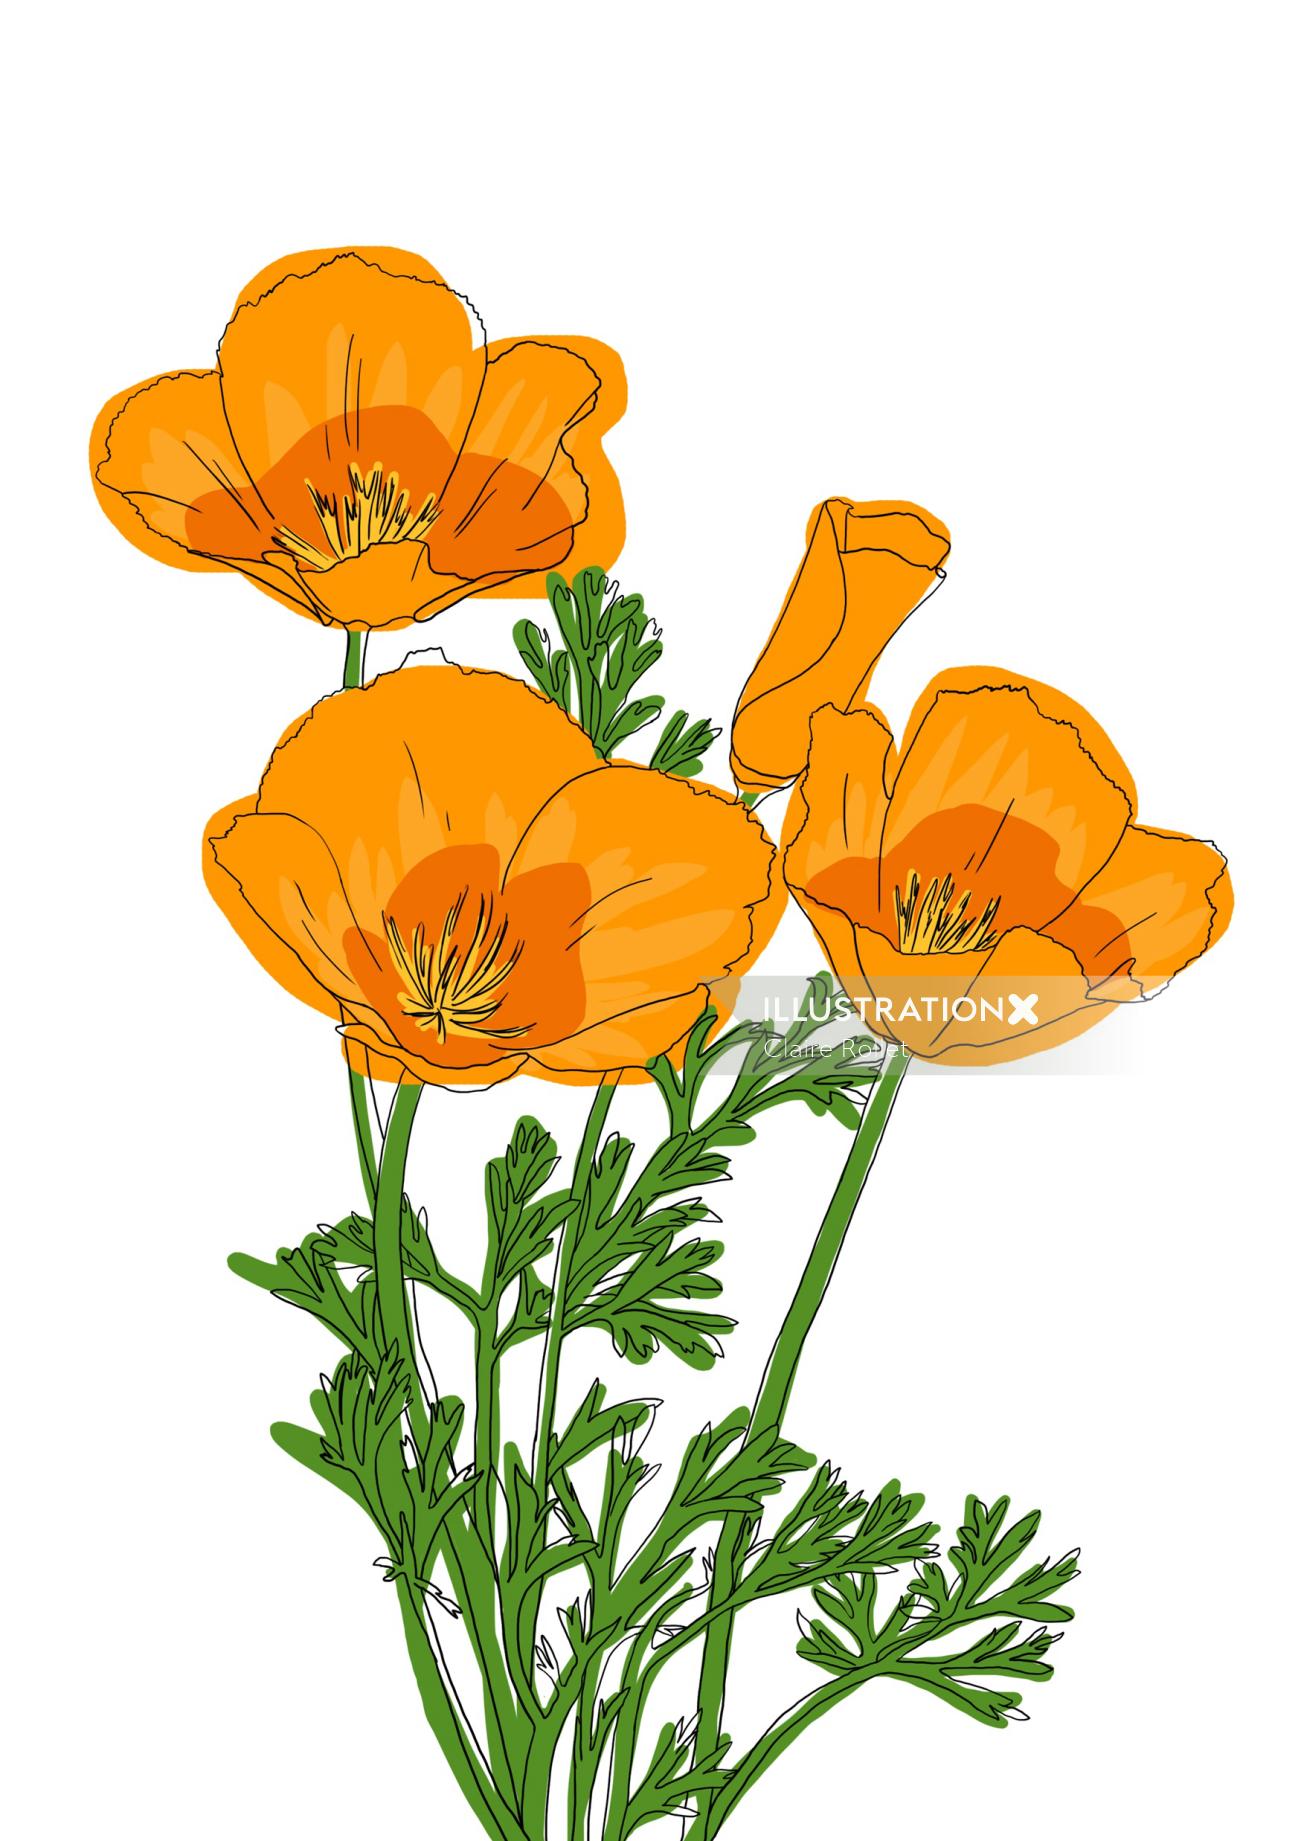 illustrated state flower of california poppy by Claire Rollet